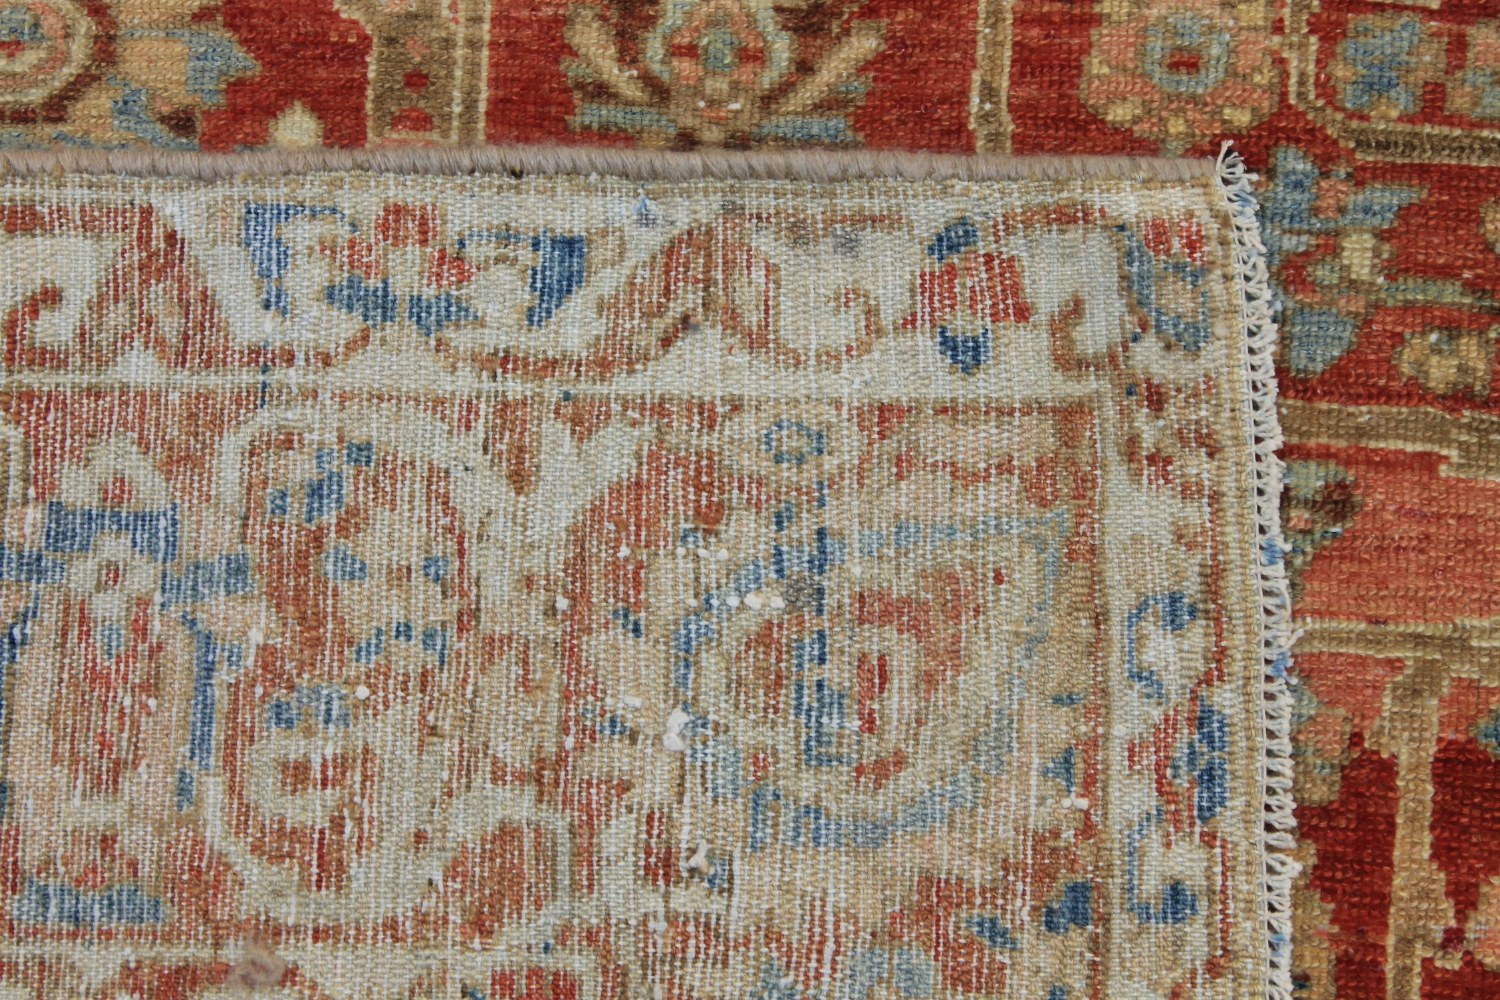 10x14 Aryana & Antique Revivals Hand Knotted Wool Area Rug - MR028279